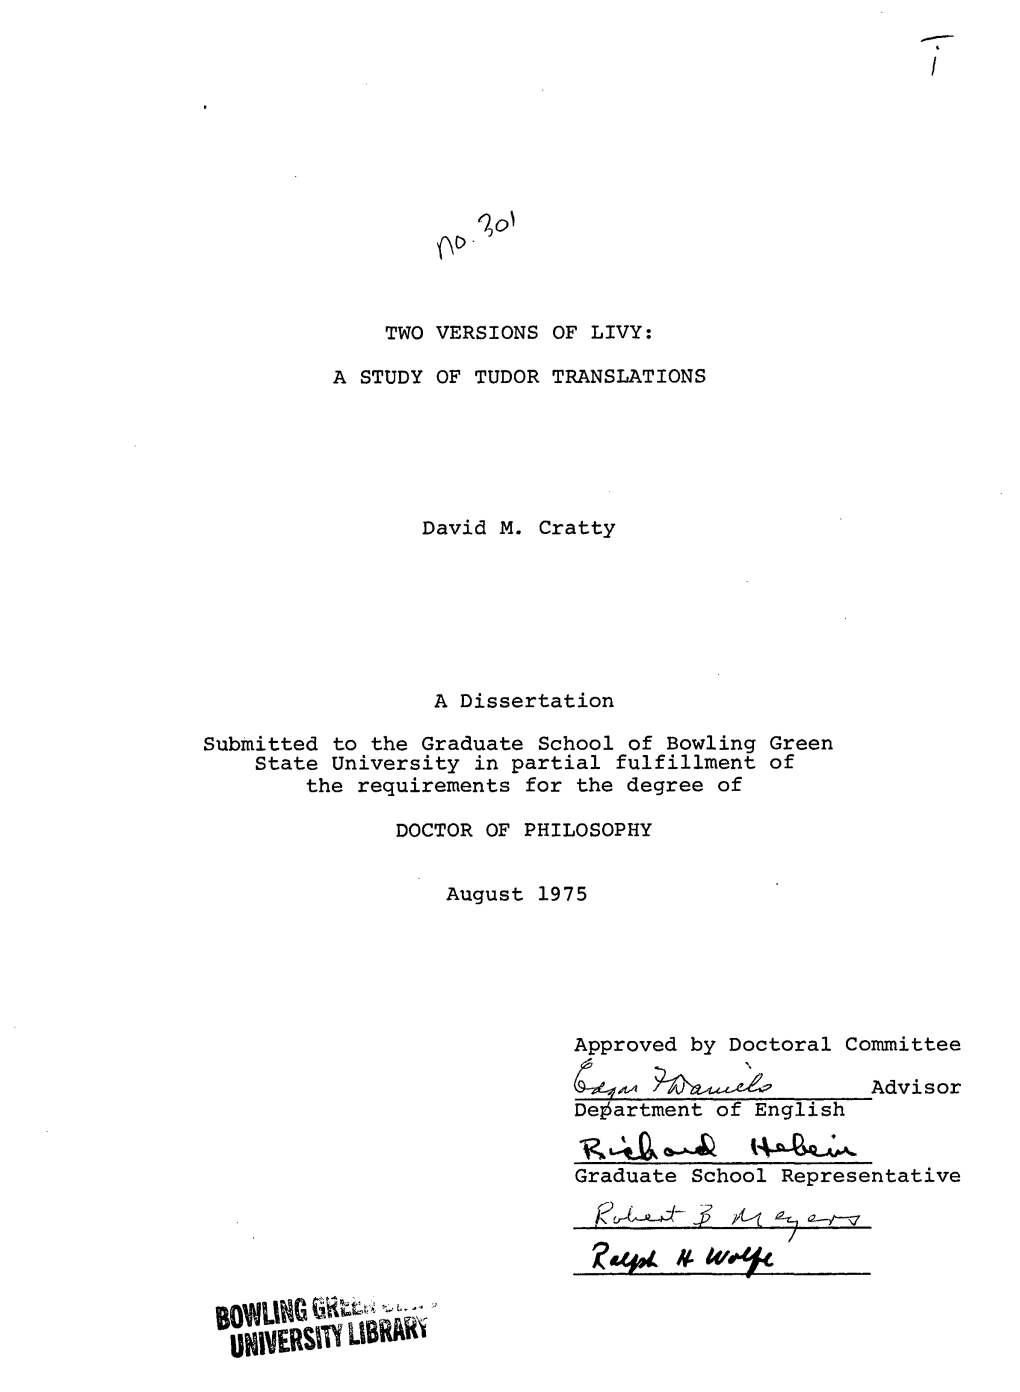 TWO VERSIONS of LIVY: a STUDY of TUDOR TRANSLATIONS State University in Partial Fulfillment of the Requirements for the Degree